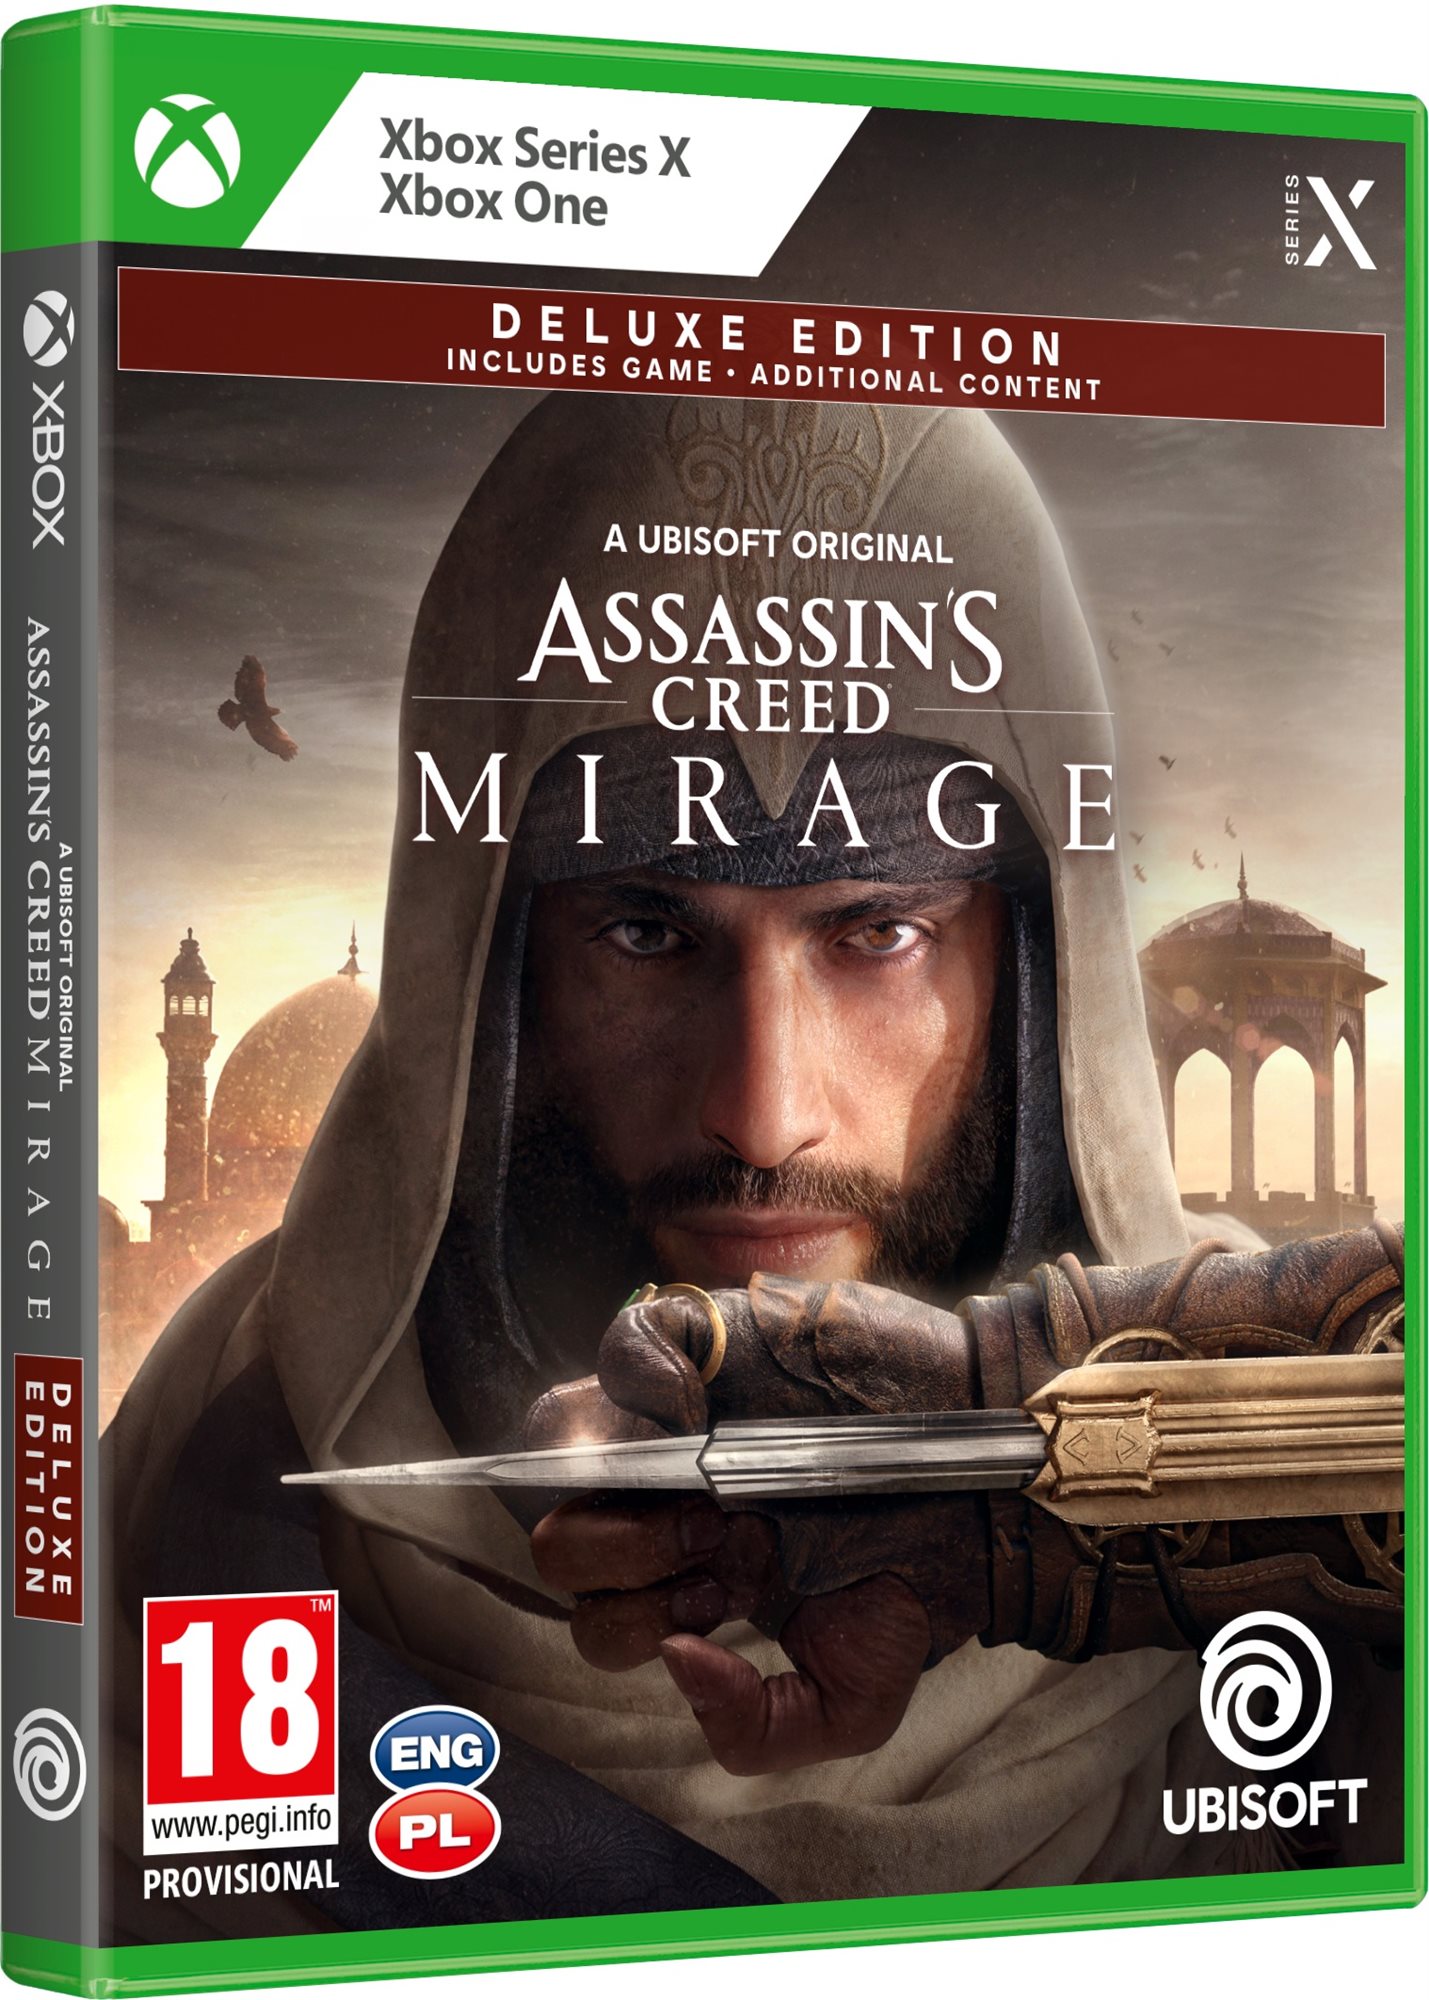 Assassins Creed Mirage: Deluxe Edition - Xbox Series